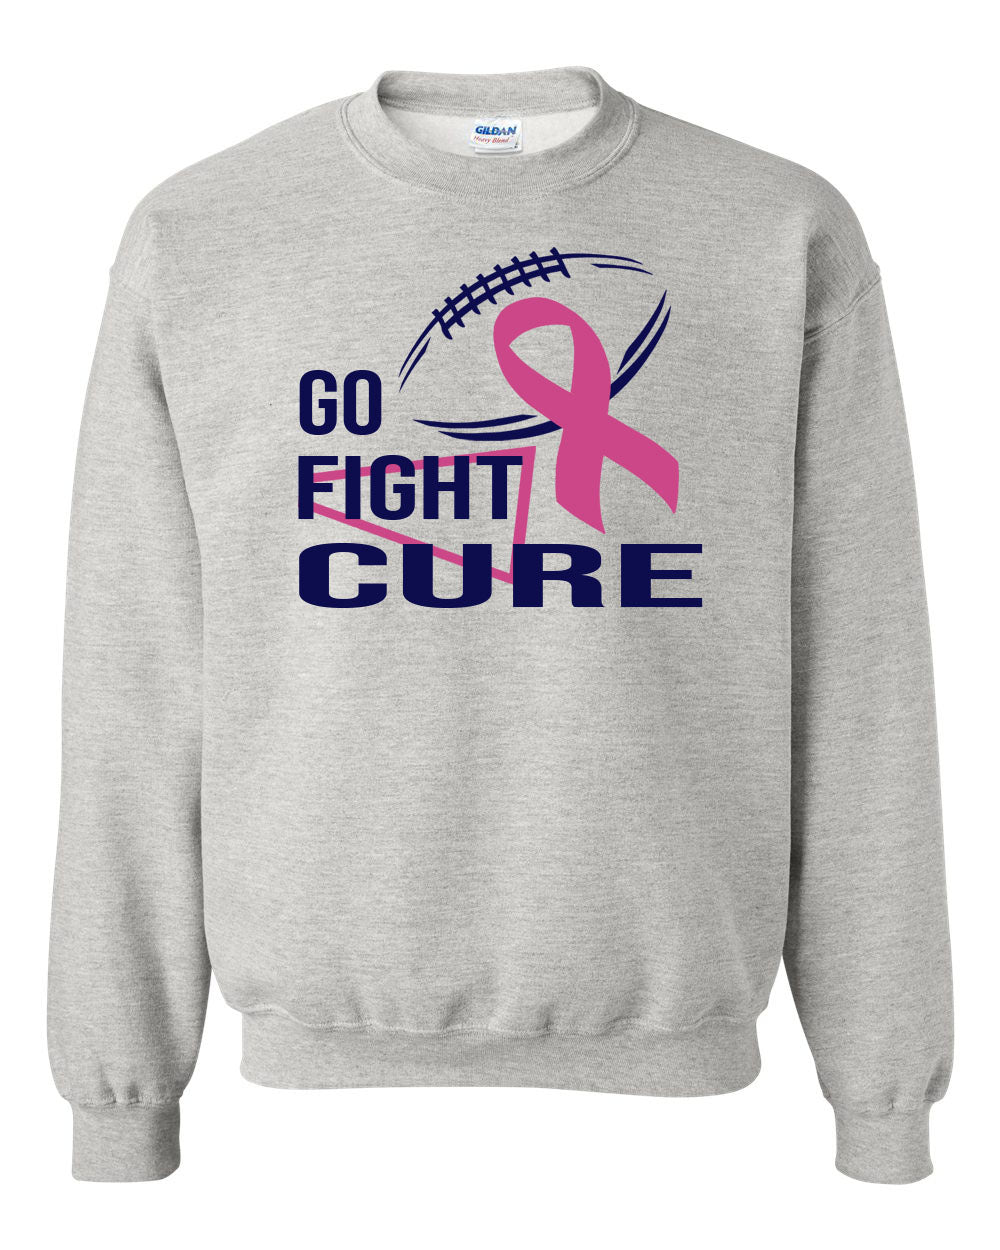 Go Fight Cure Cheer non hooded sweatshirt